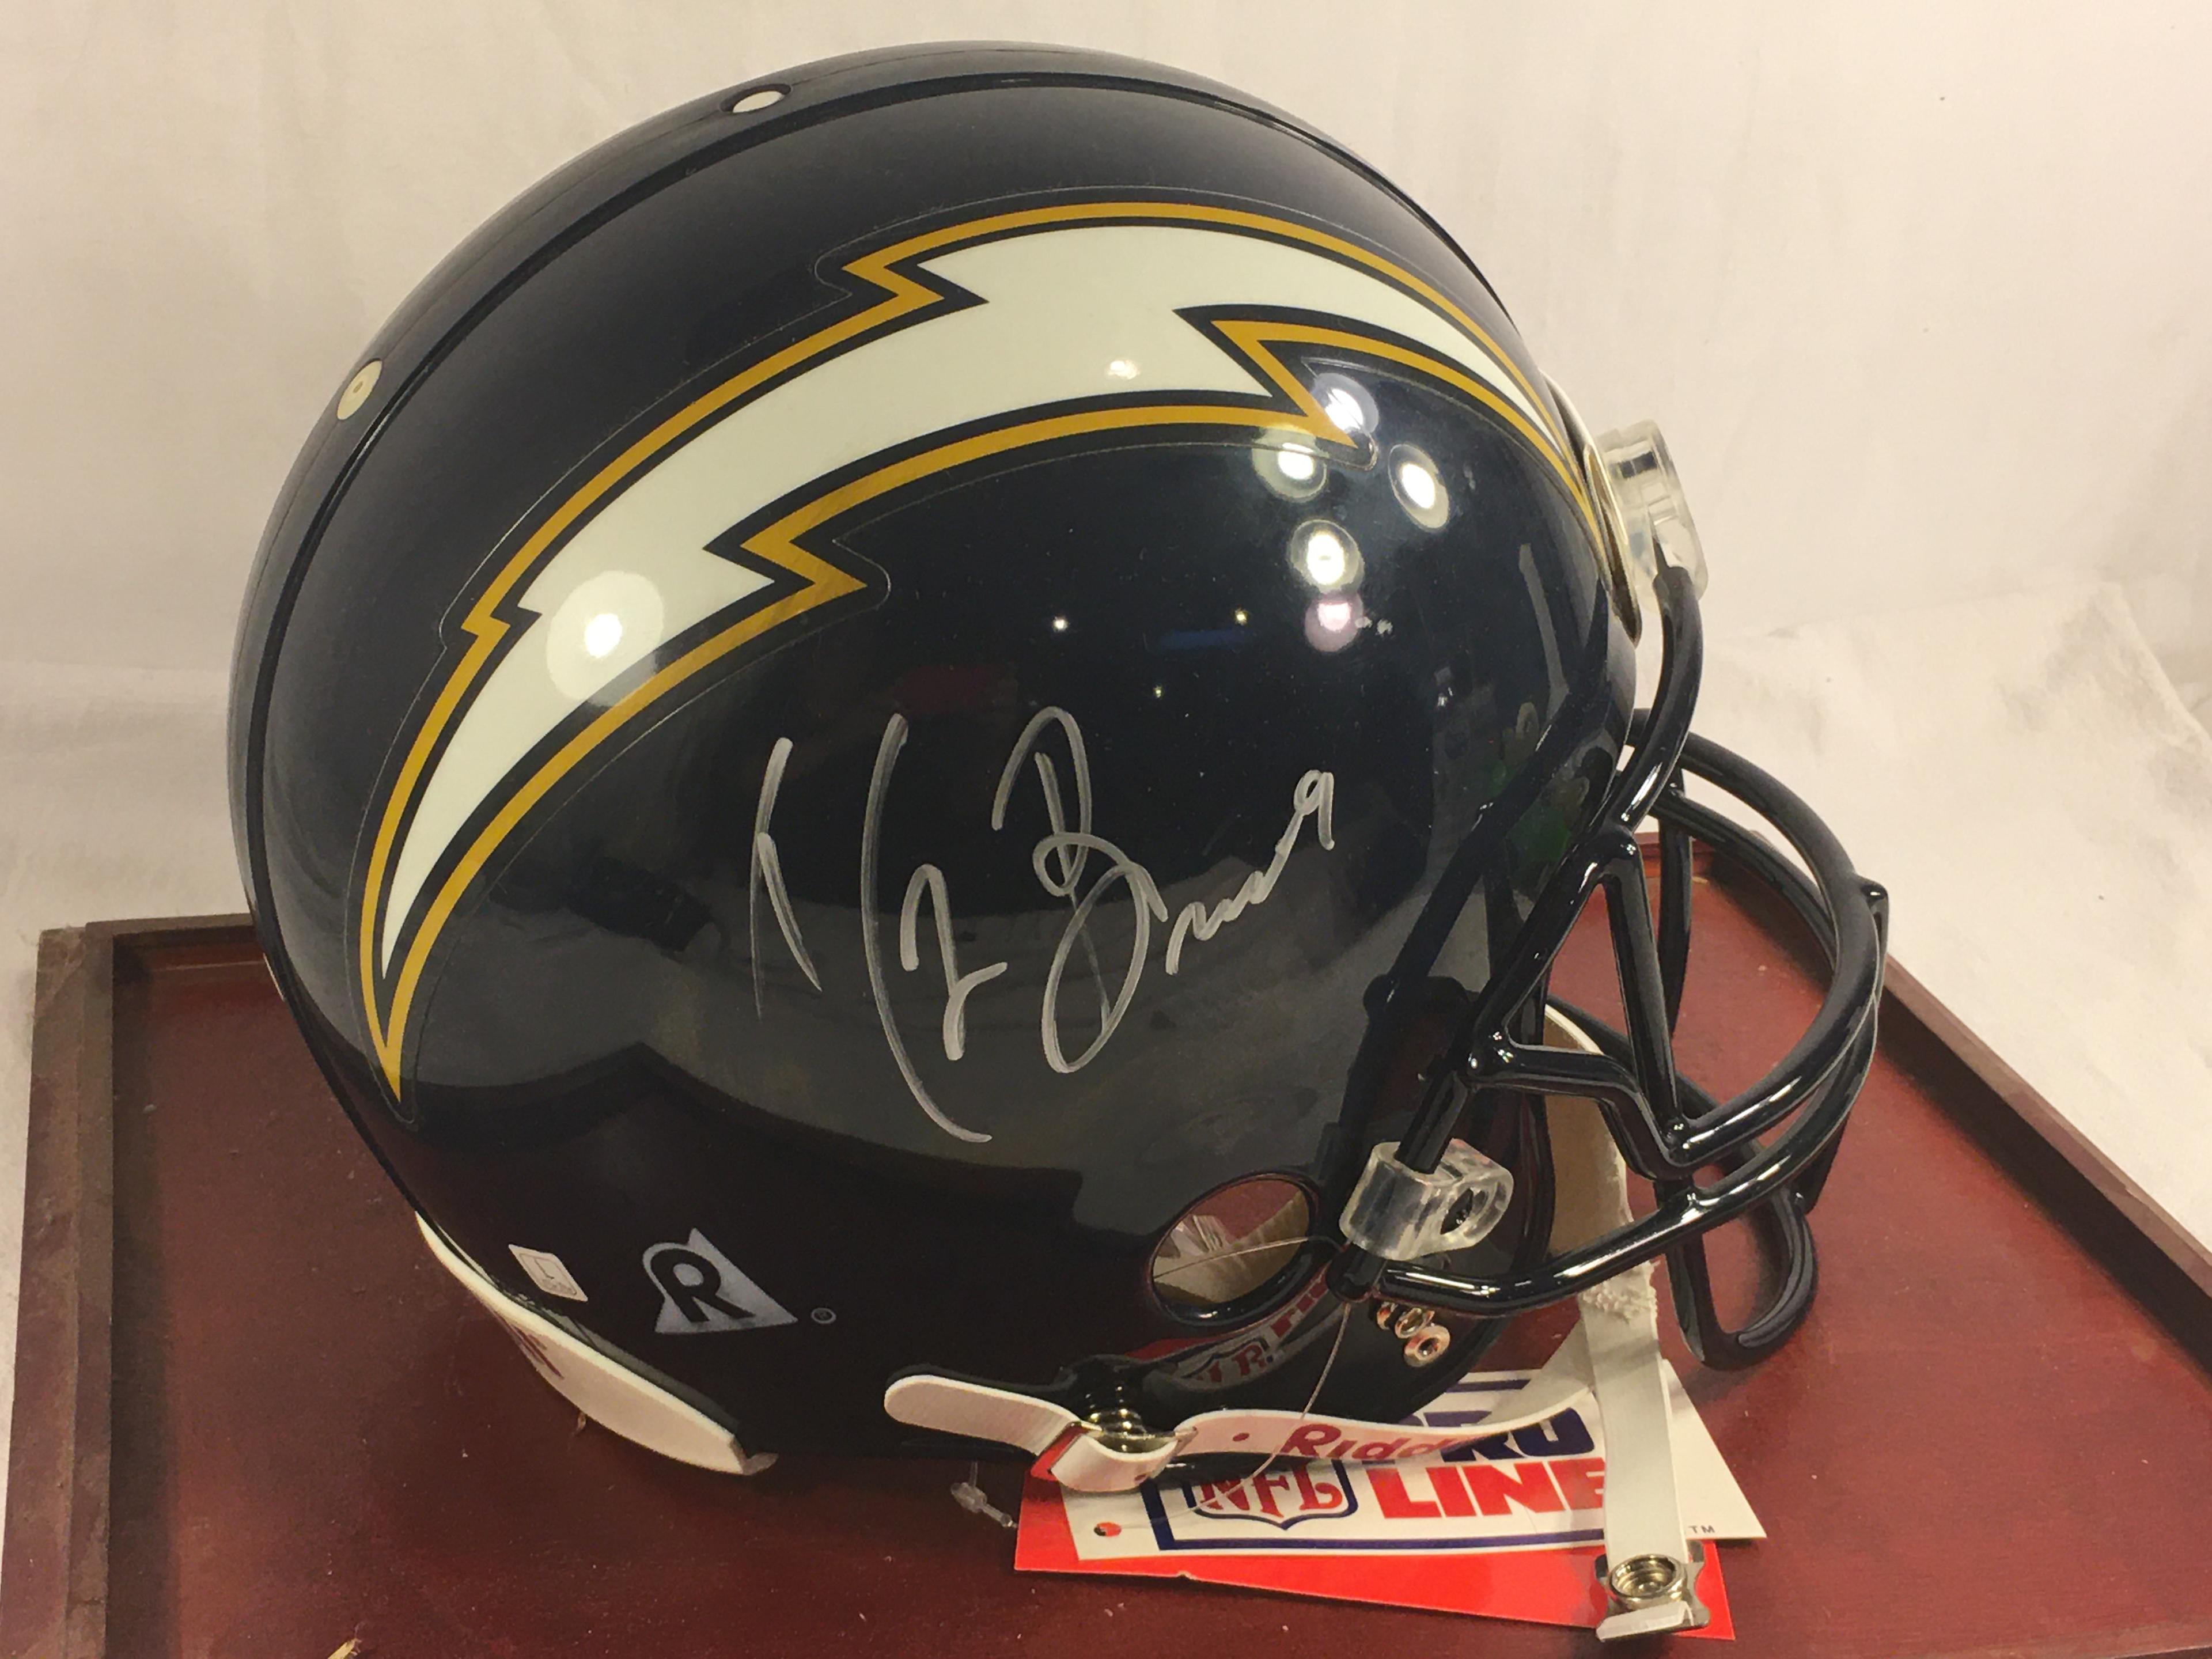 Collector Signed Riddell NFL Football Helmet in Case 17.5"X12"X12" - See Pictures